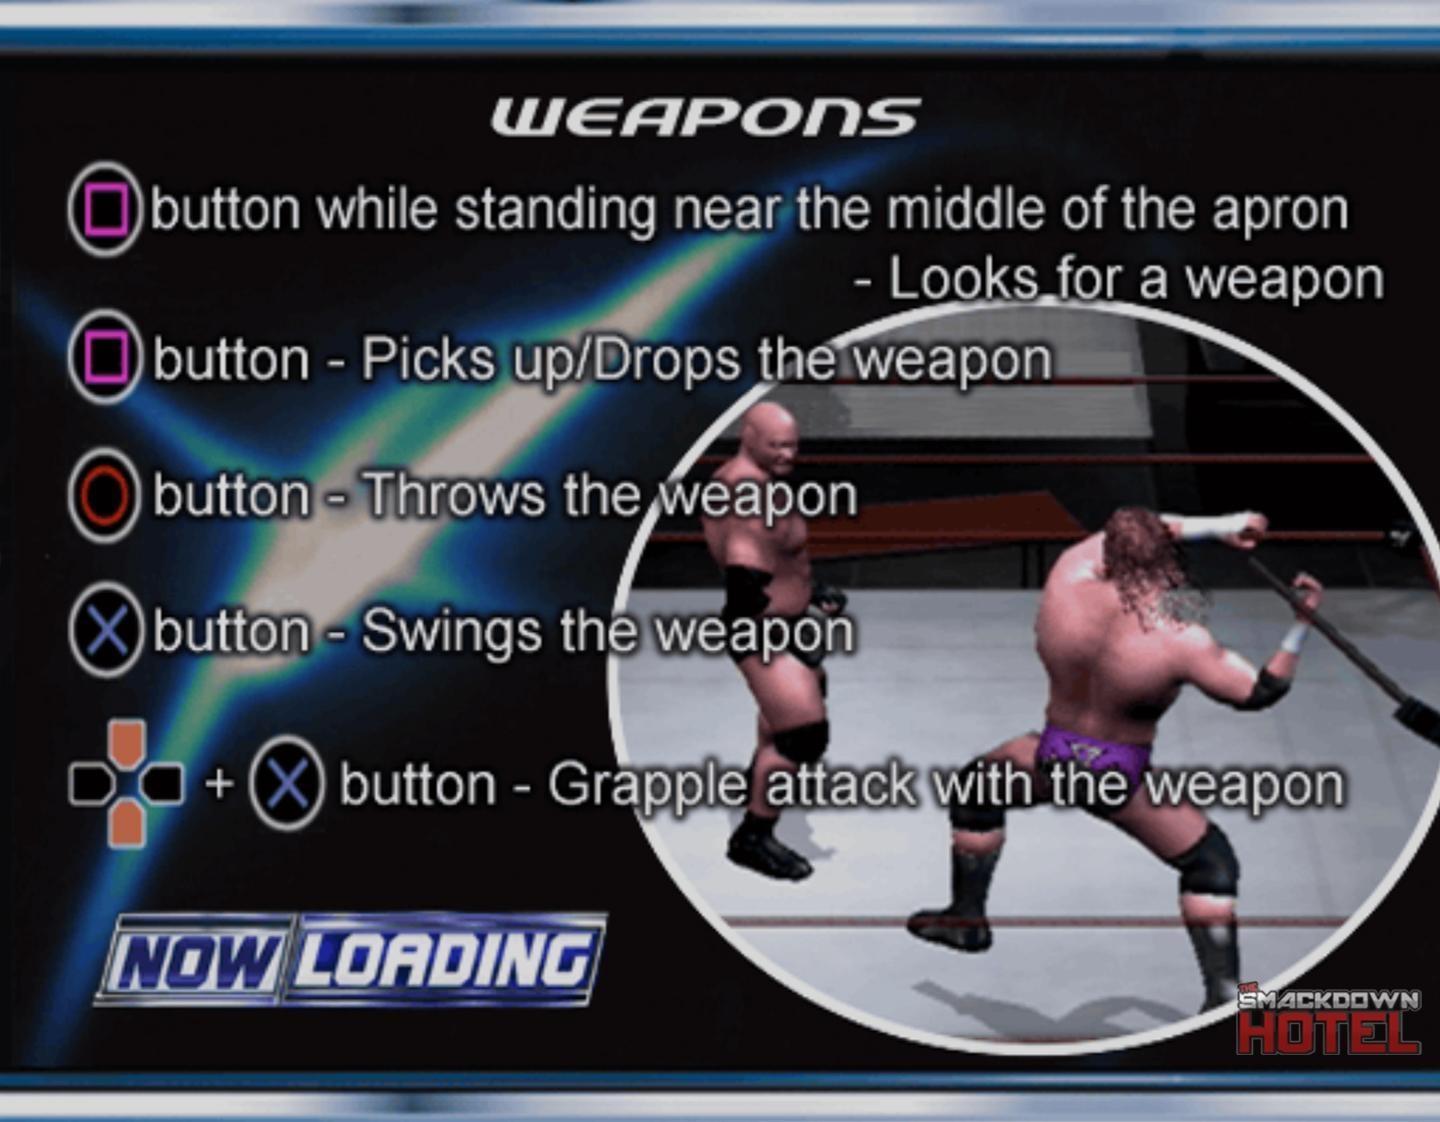 game smackdown ps2